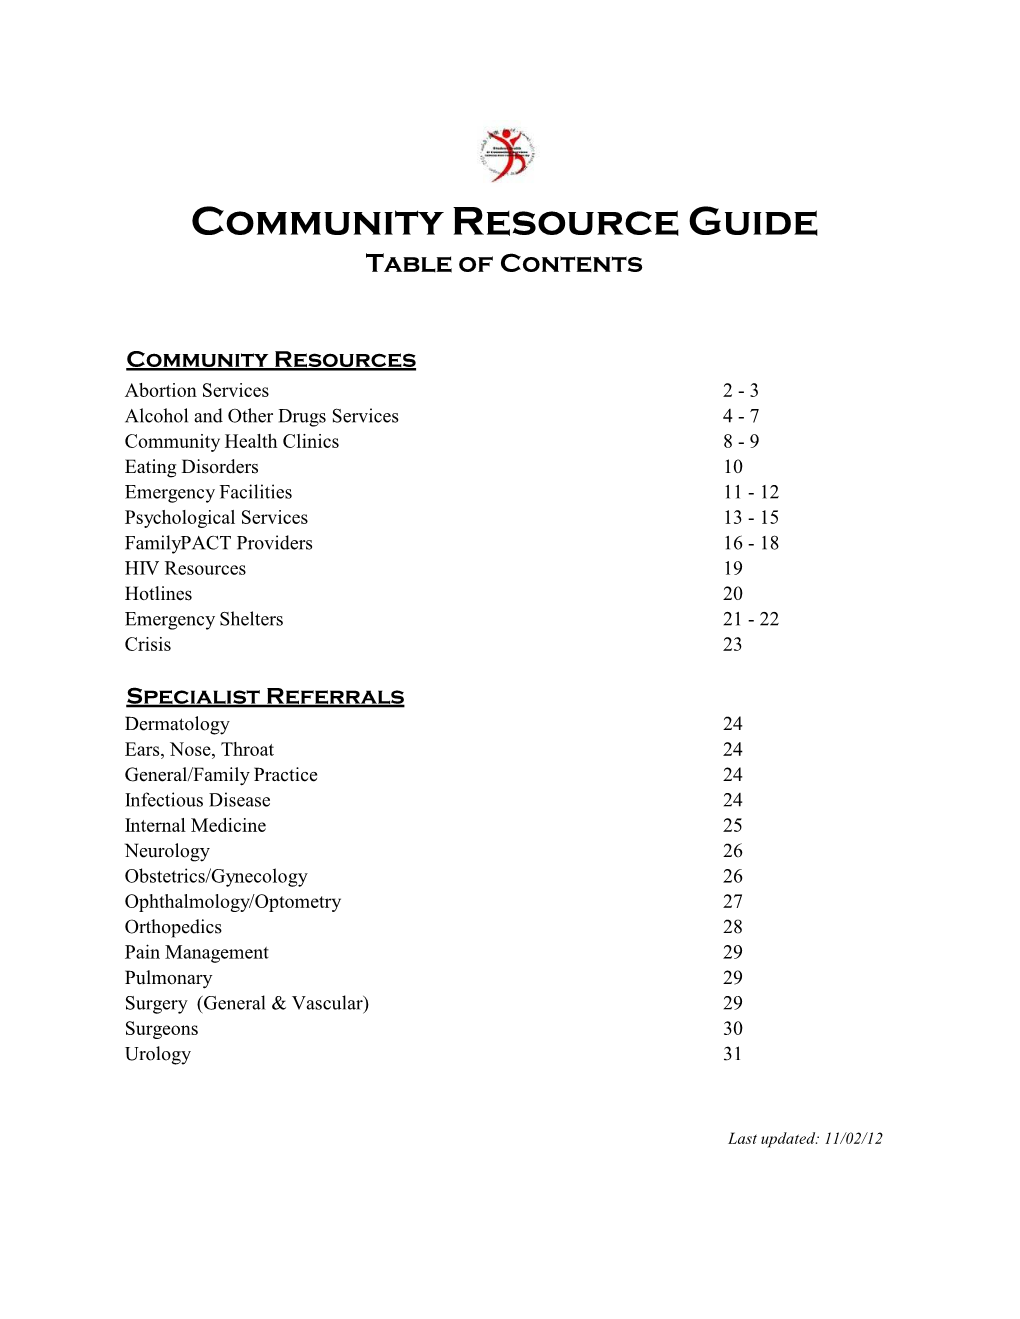 Community Resource Guide Table of Contents